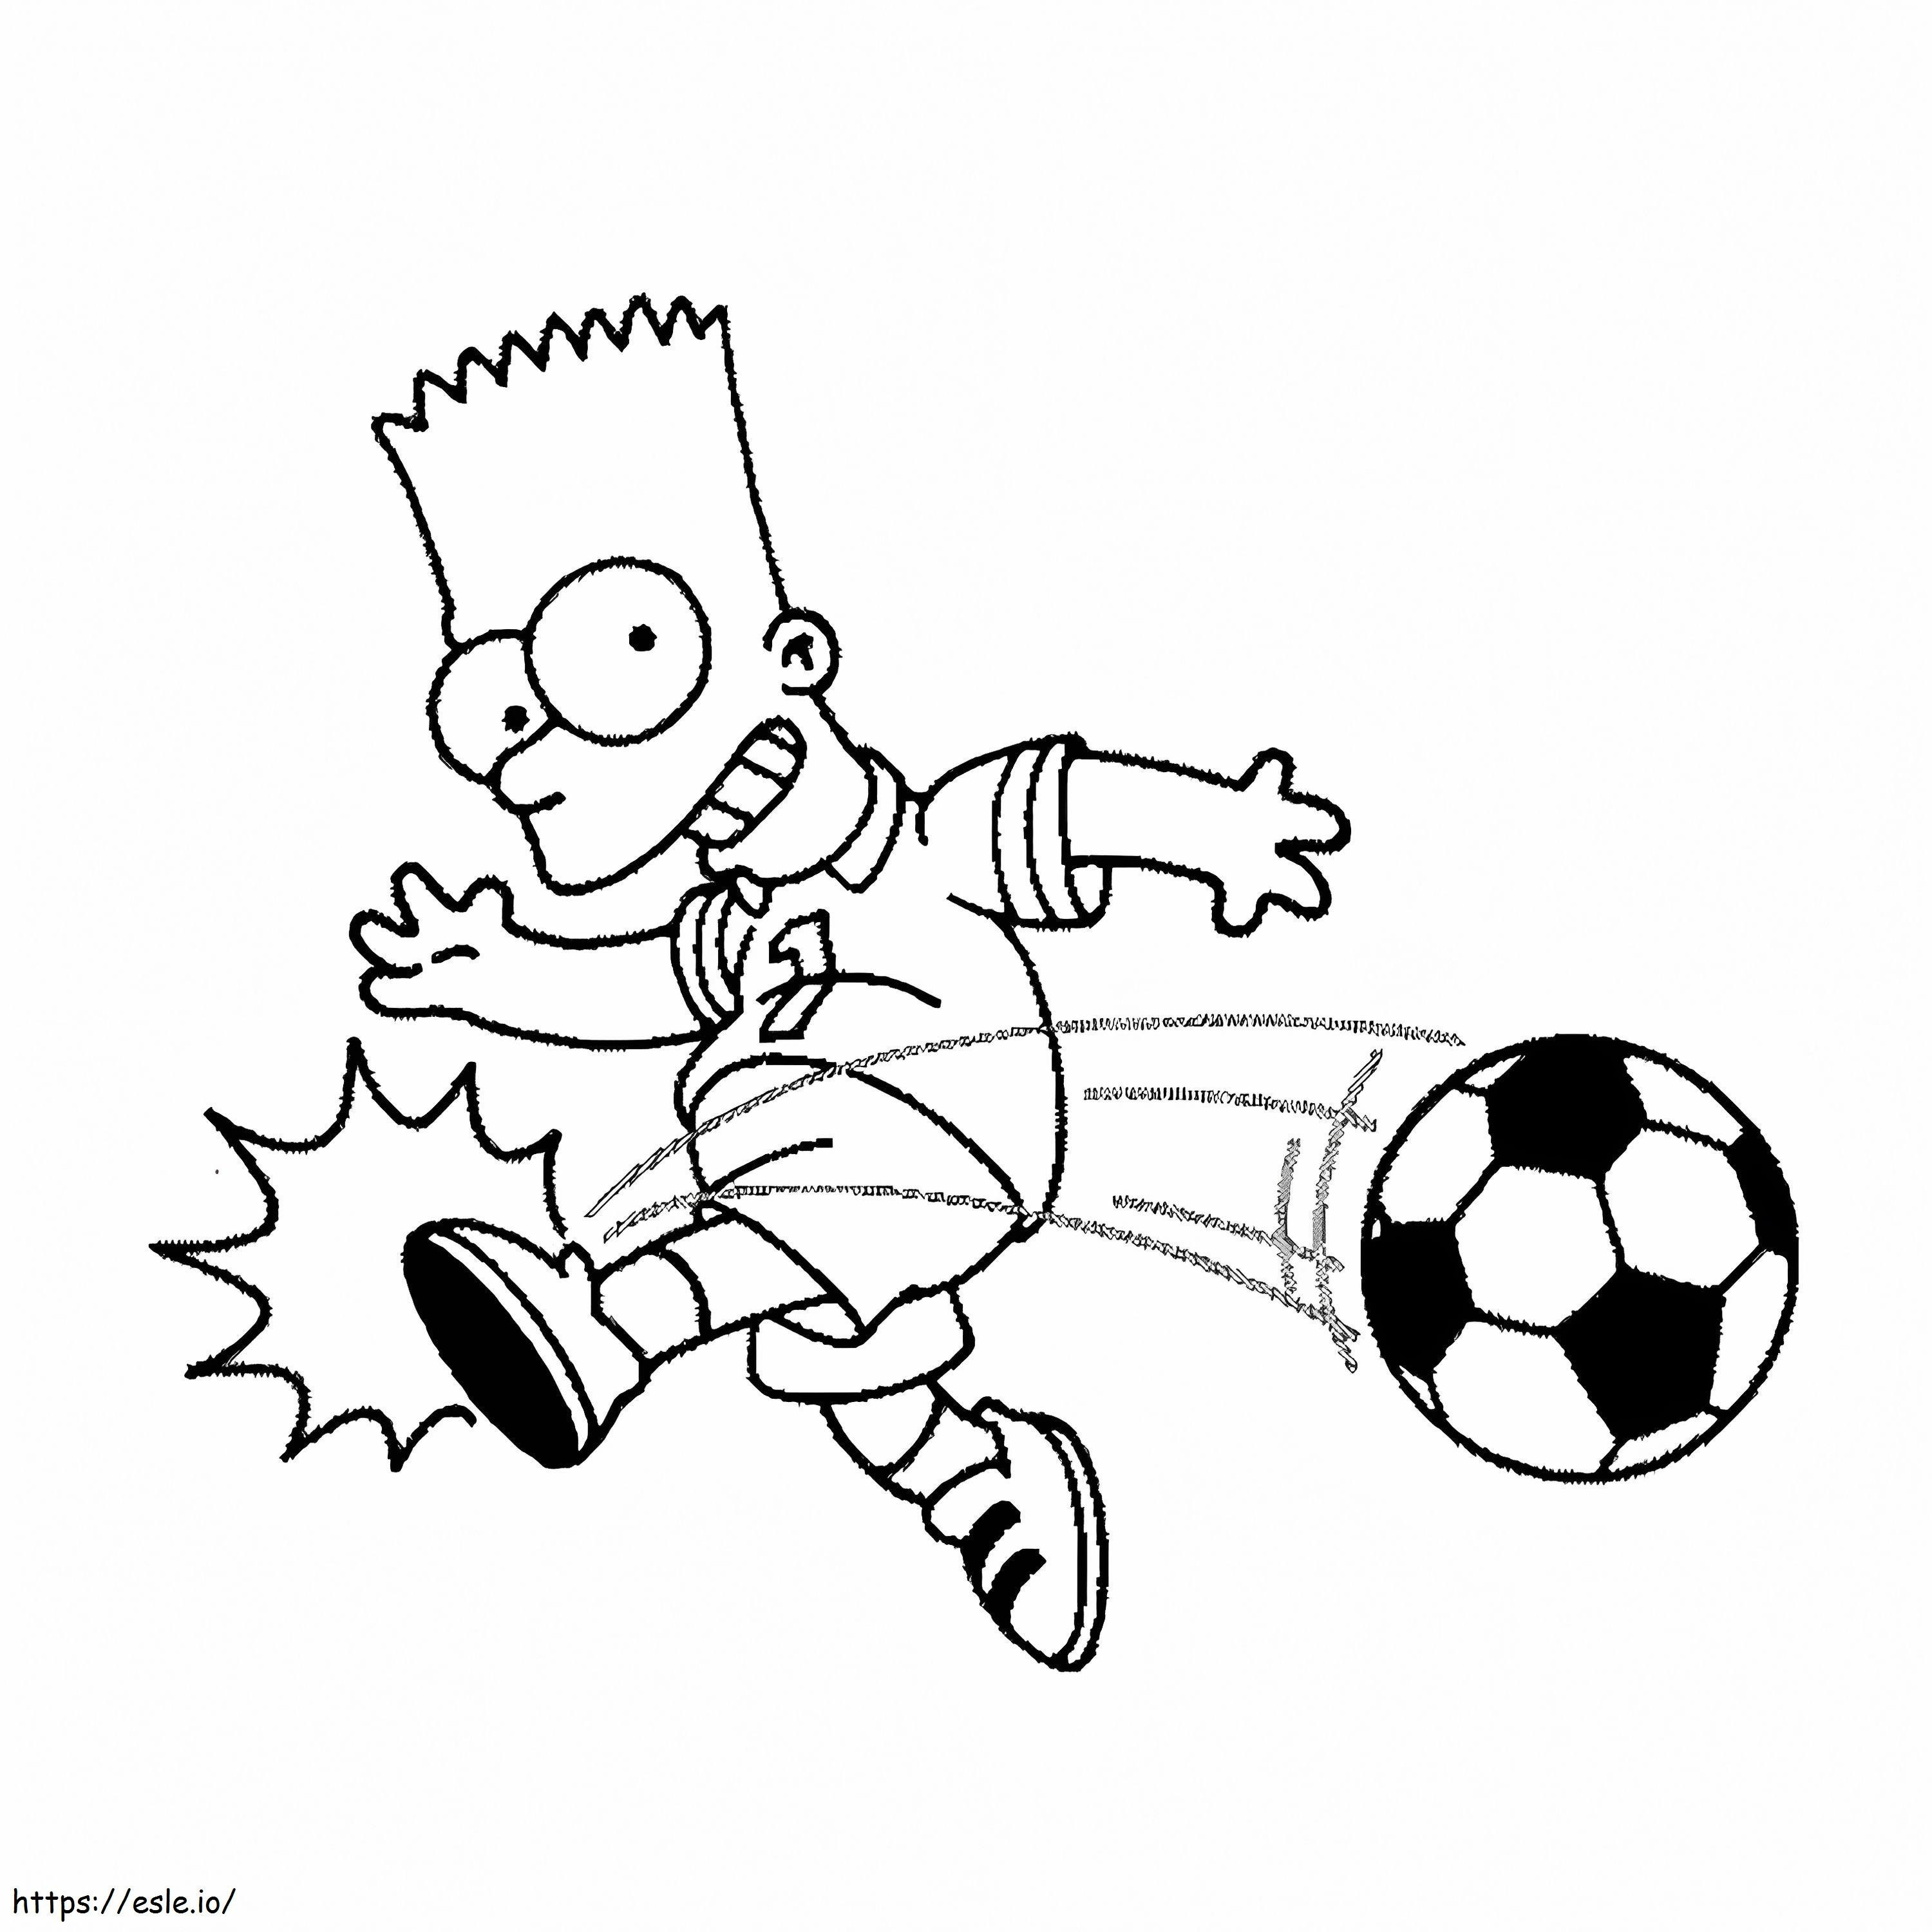 Bart Plays Football coloring page